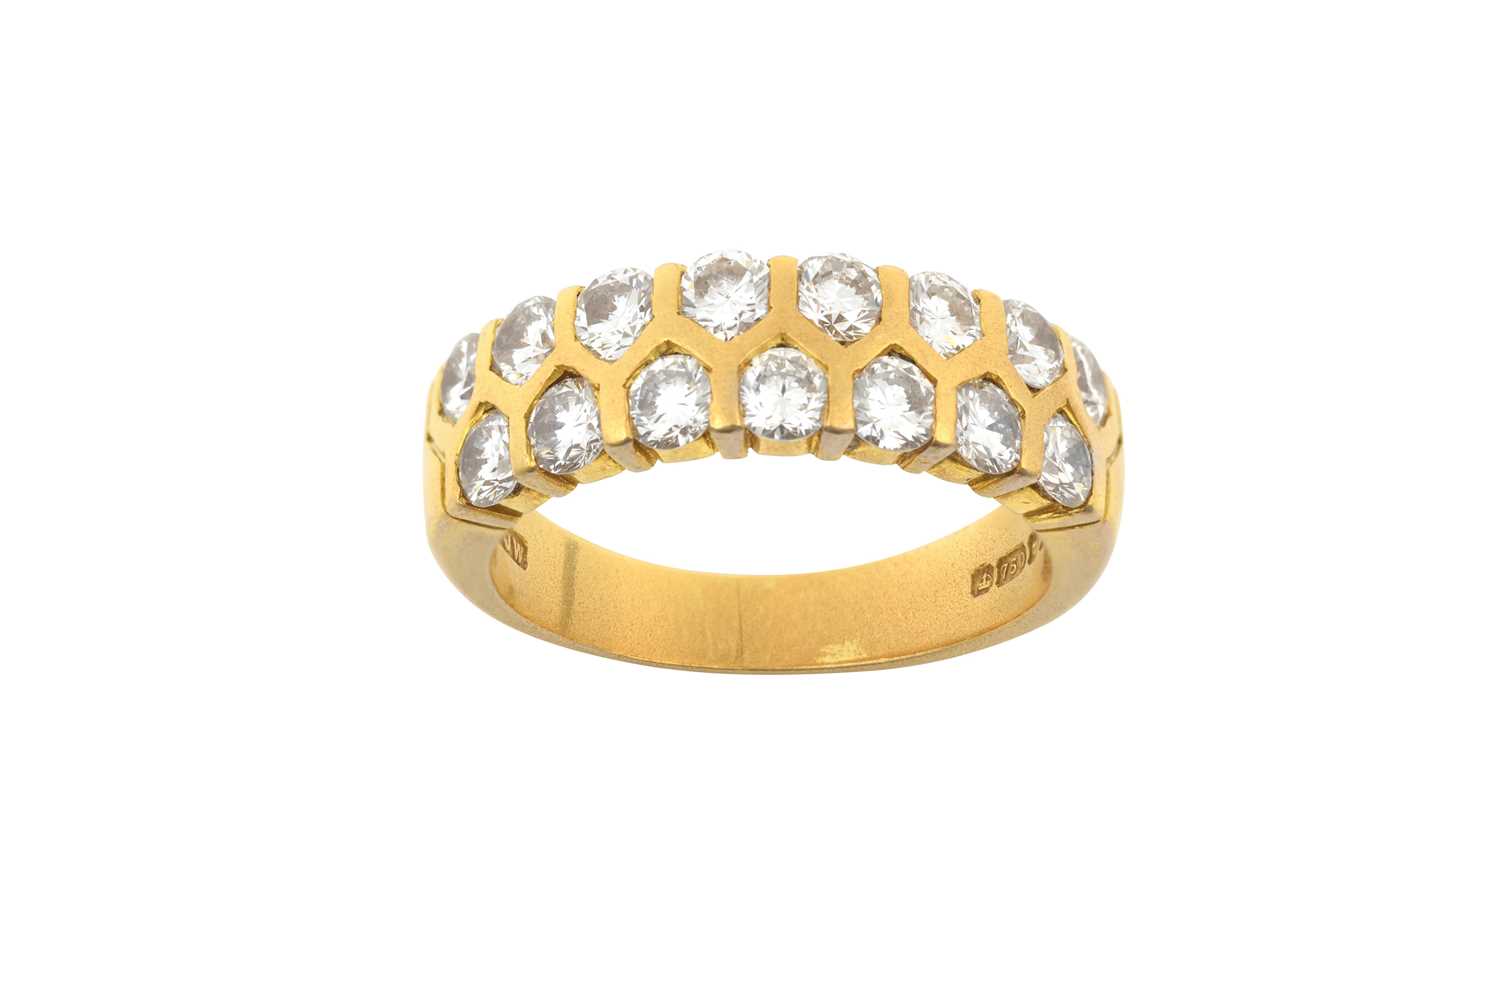 An 18 Carat Gold Diamond Half Hoop Ring two rows of round brilliant cut diamonds in yellow tension